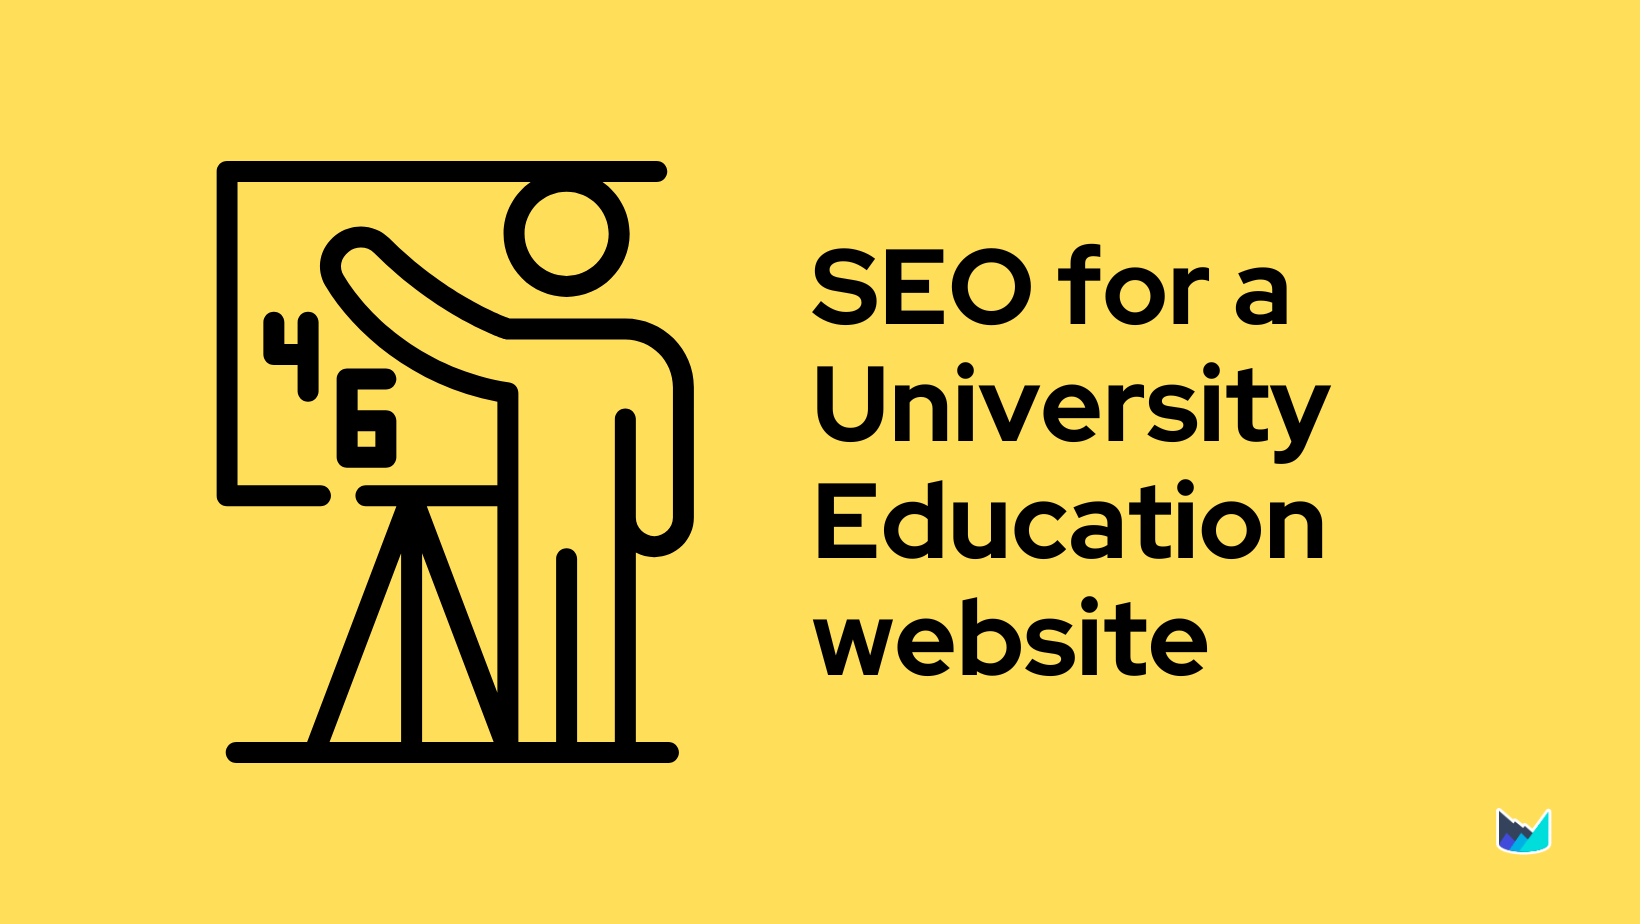 SEO Guide for Higher Education or University Education